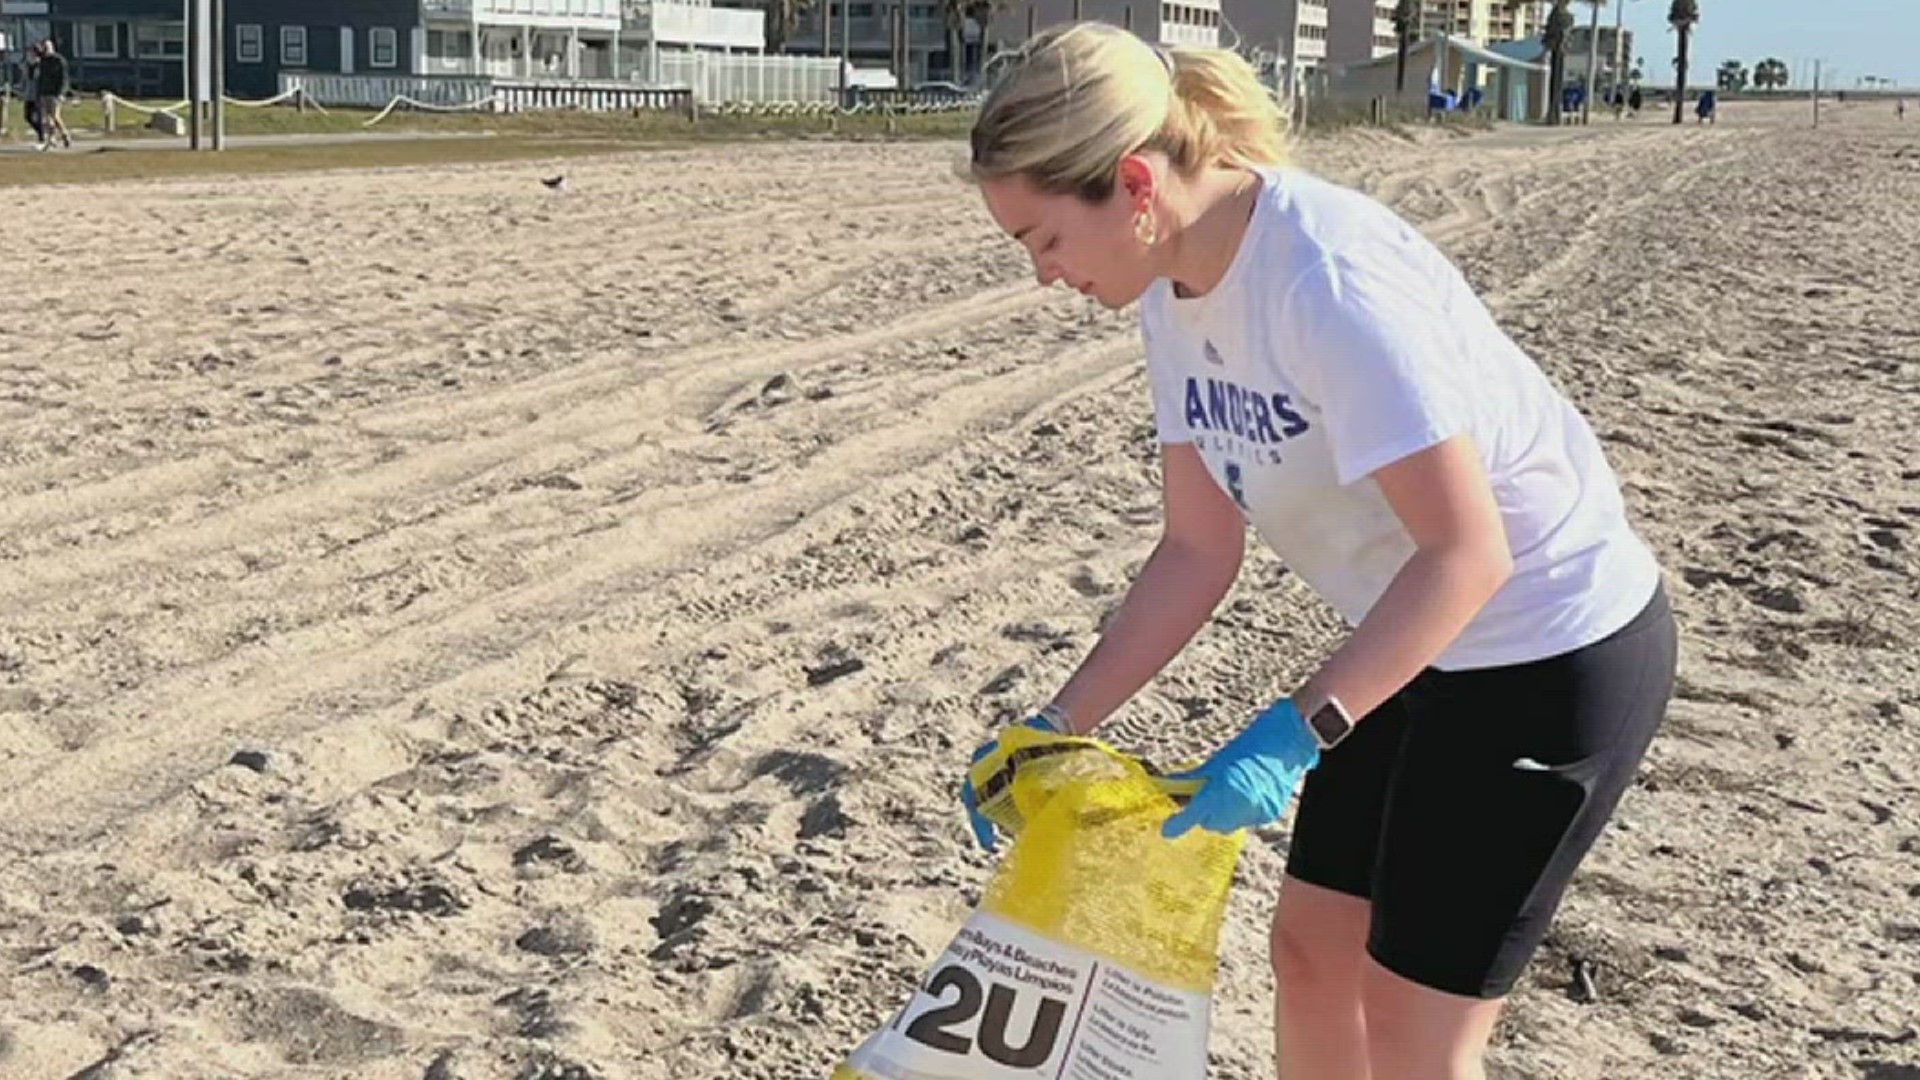 The beach clean up event will be from 8:30 a.m. until noon Saturday.